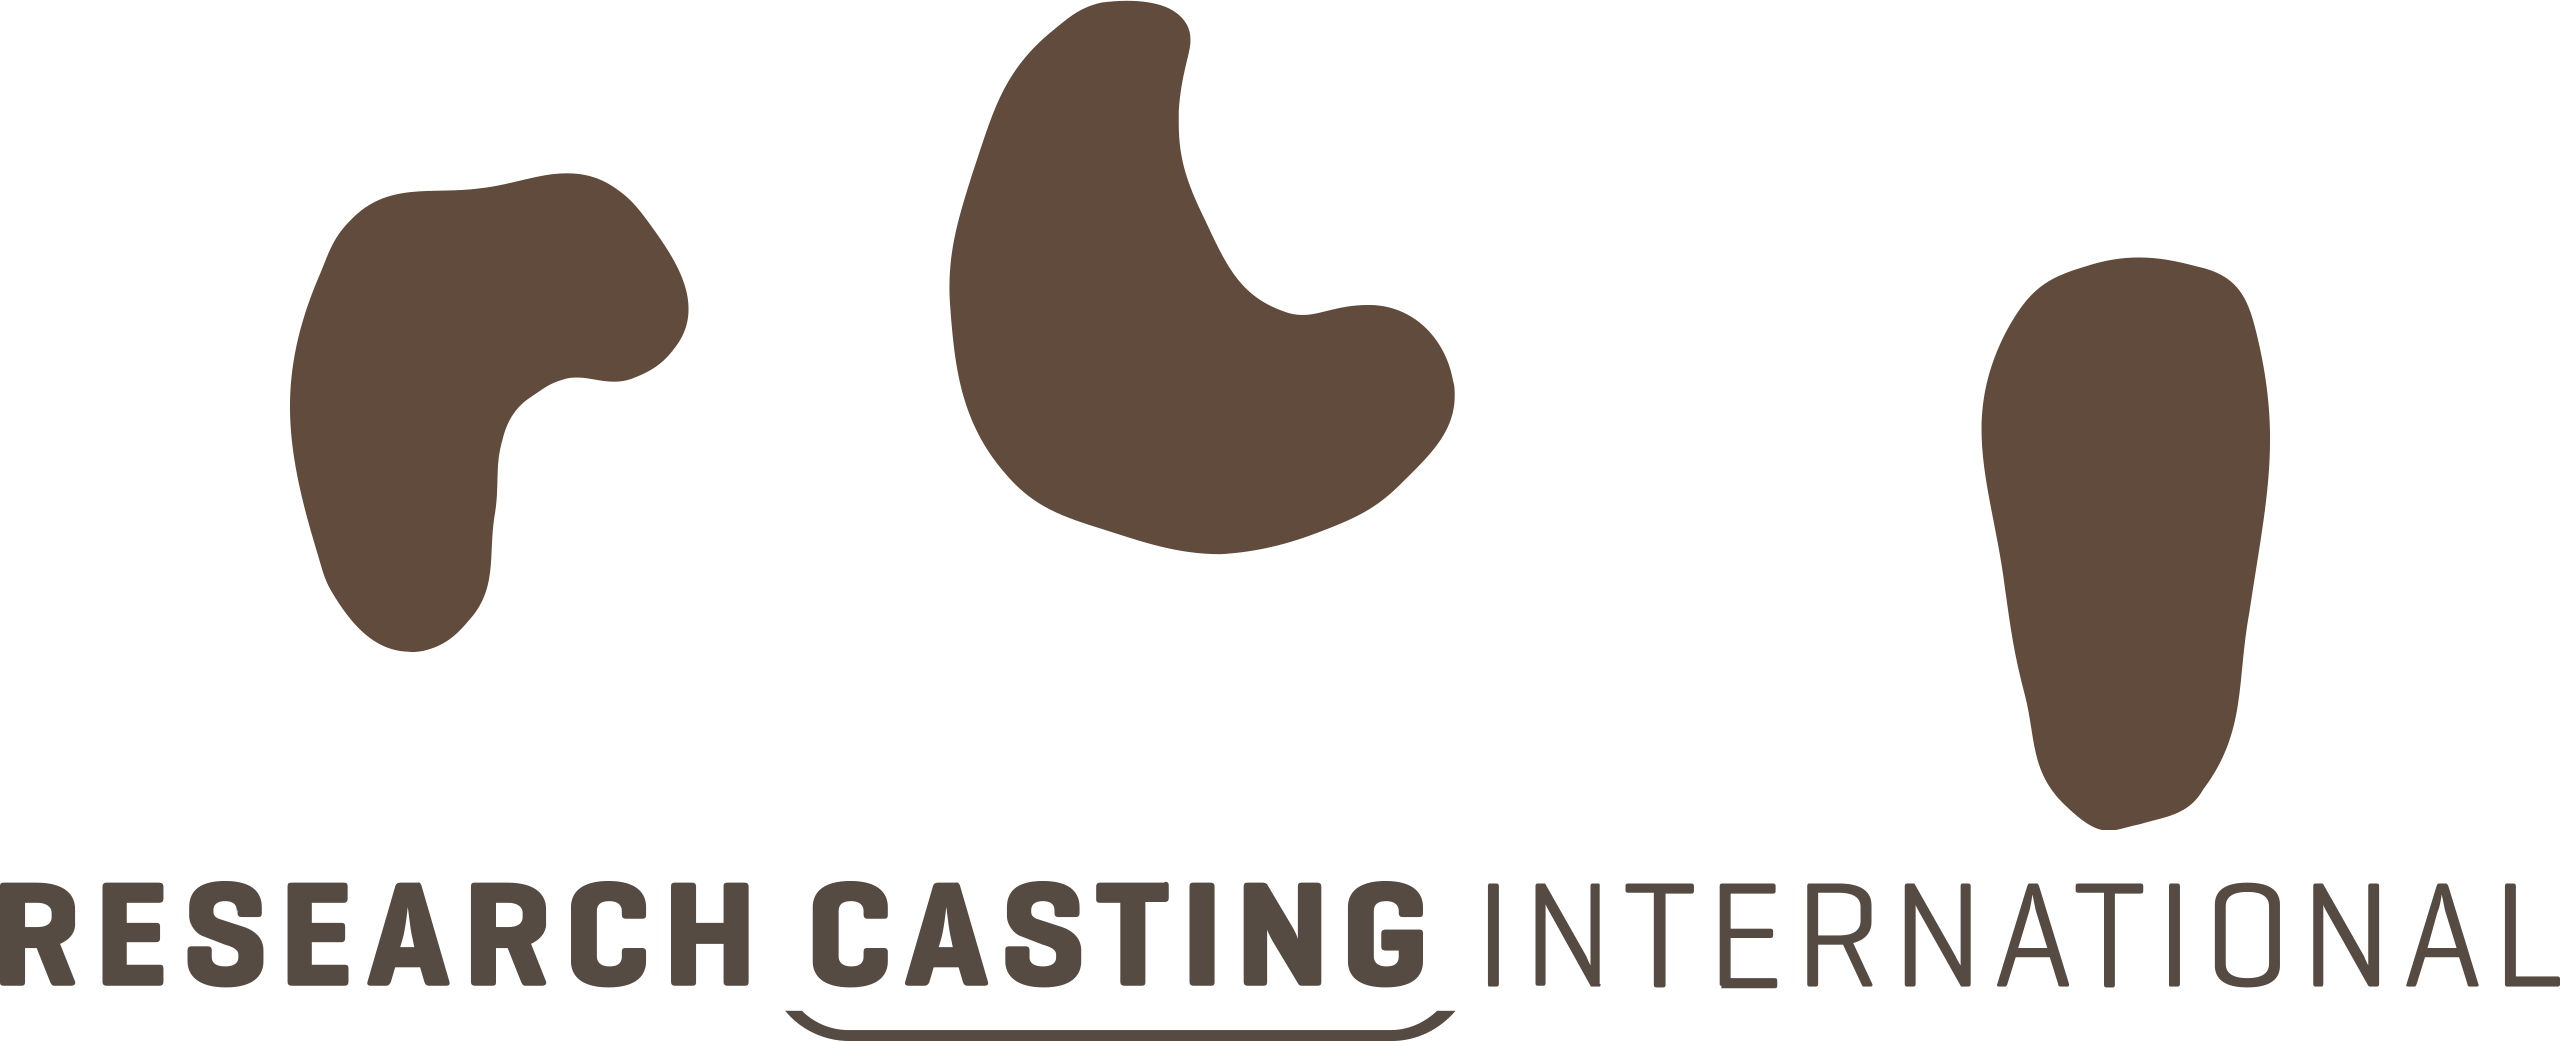 Research Casting International